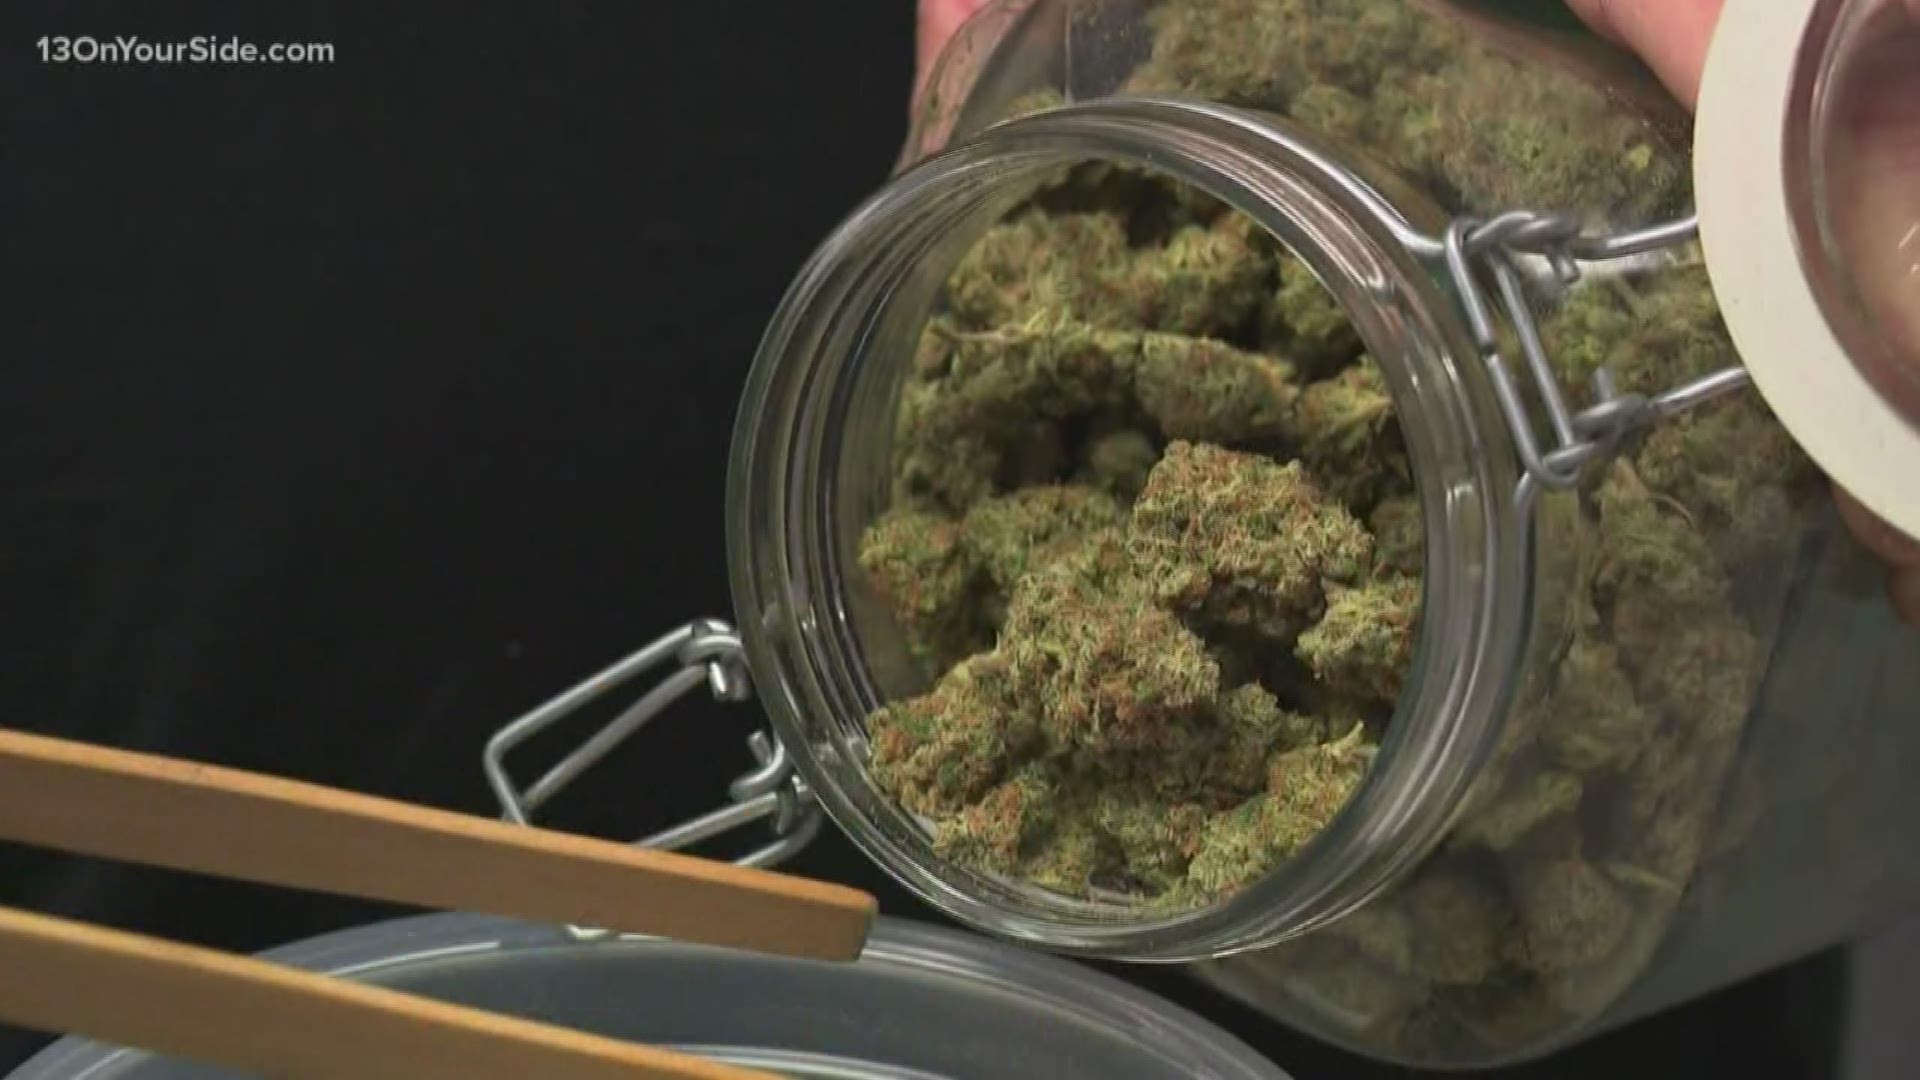 City Commissioner Senita Lenear proposed a 6 month delay on all recreational marijuana applications this week.